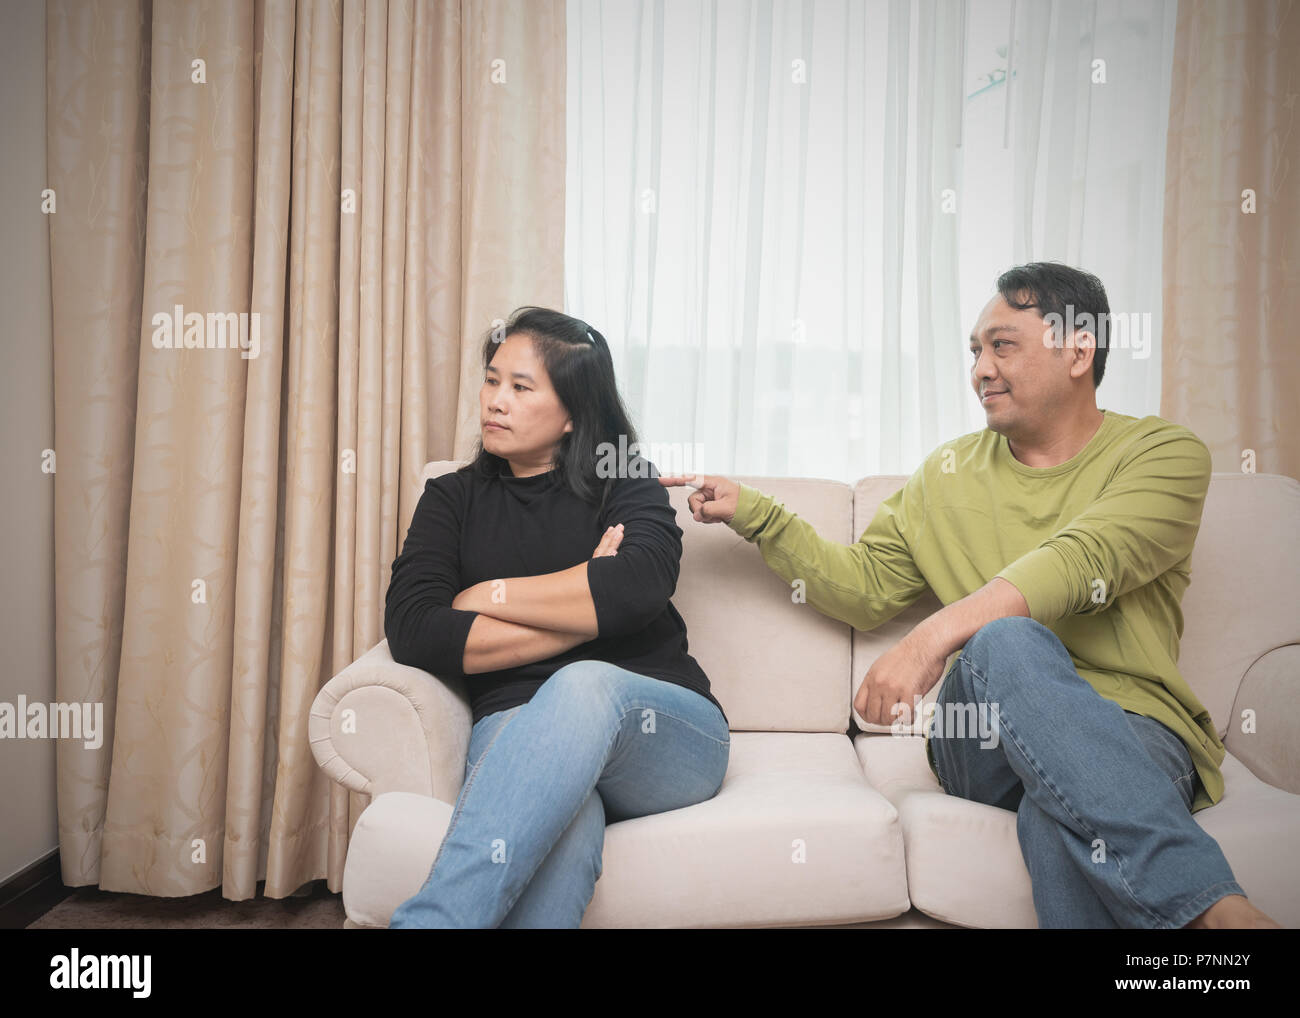 Couple relationship concepts. Husband trying to reconcile his wife after have an argument on sofa. Stock Photo